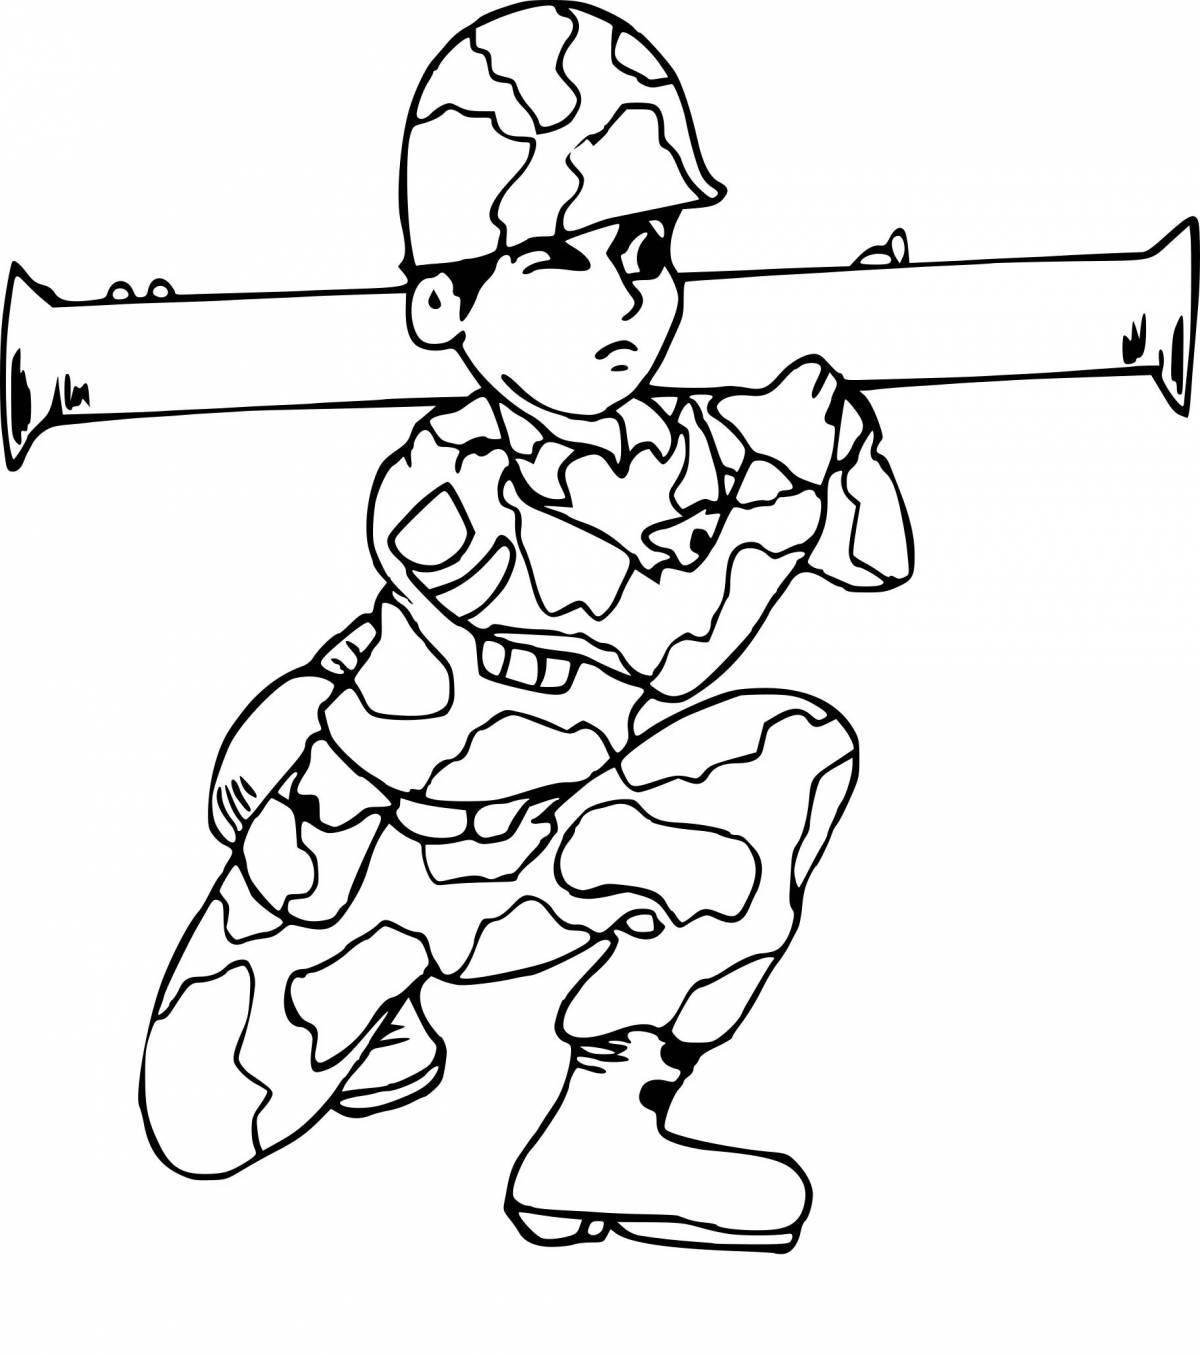 Fun coloring pages soldiers for kids